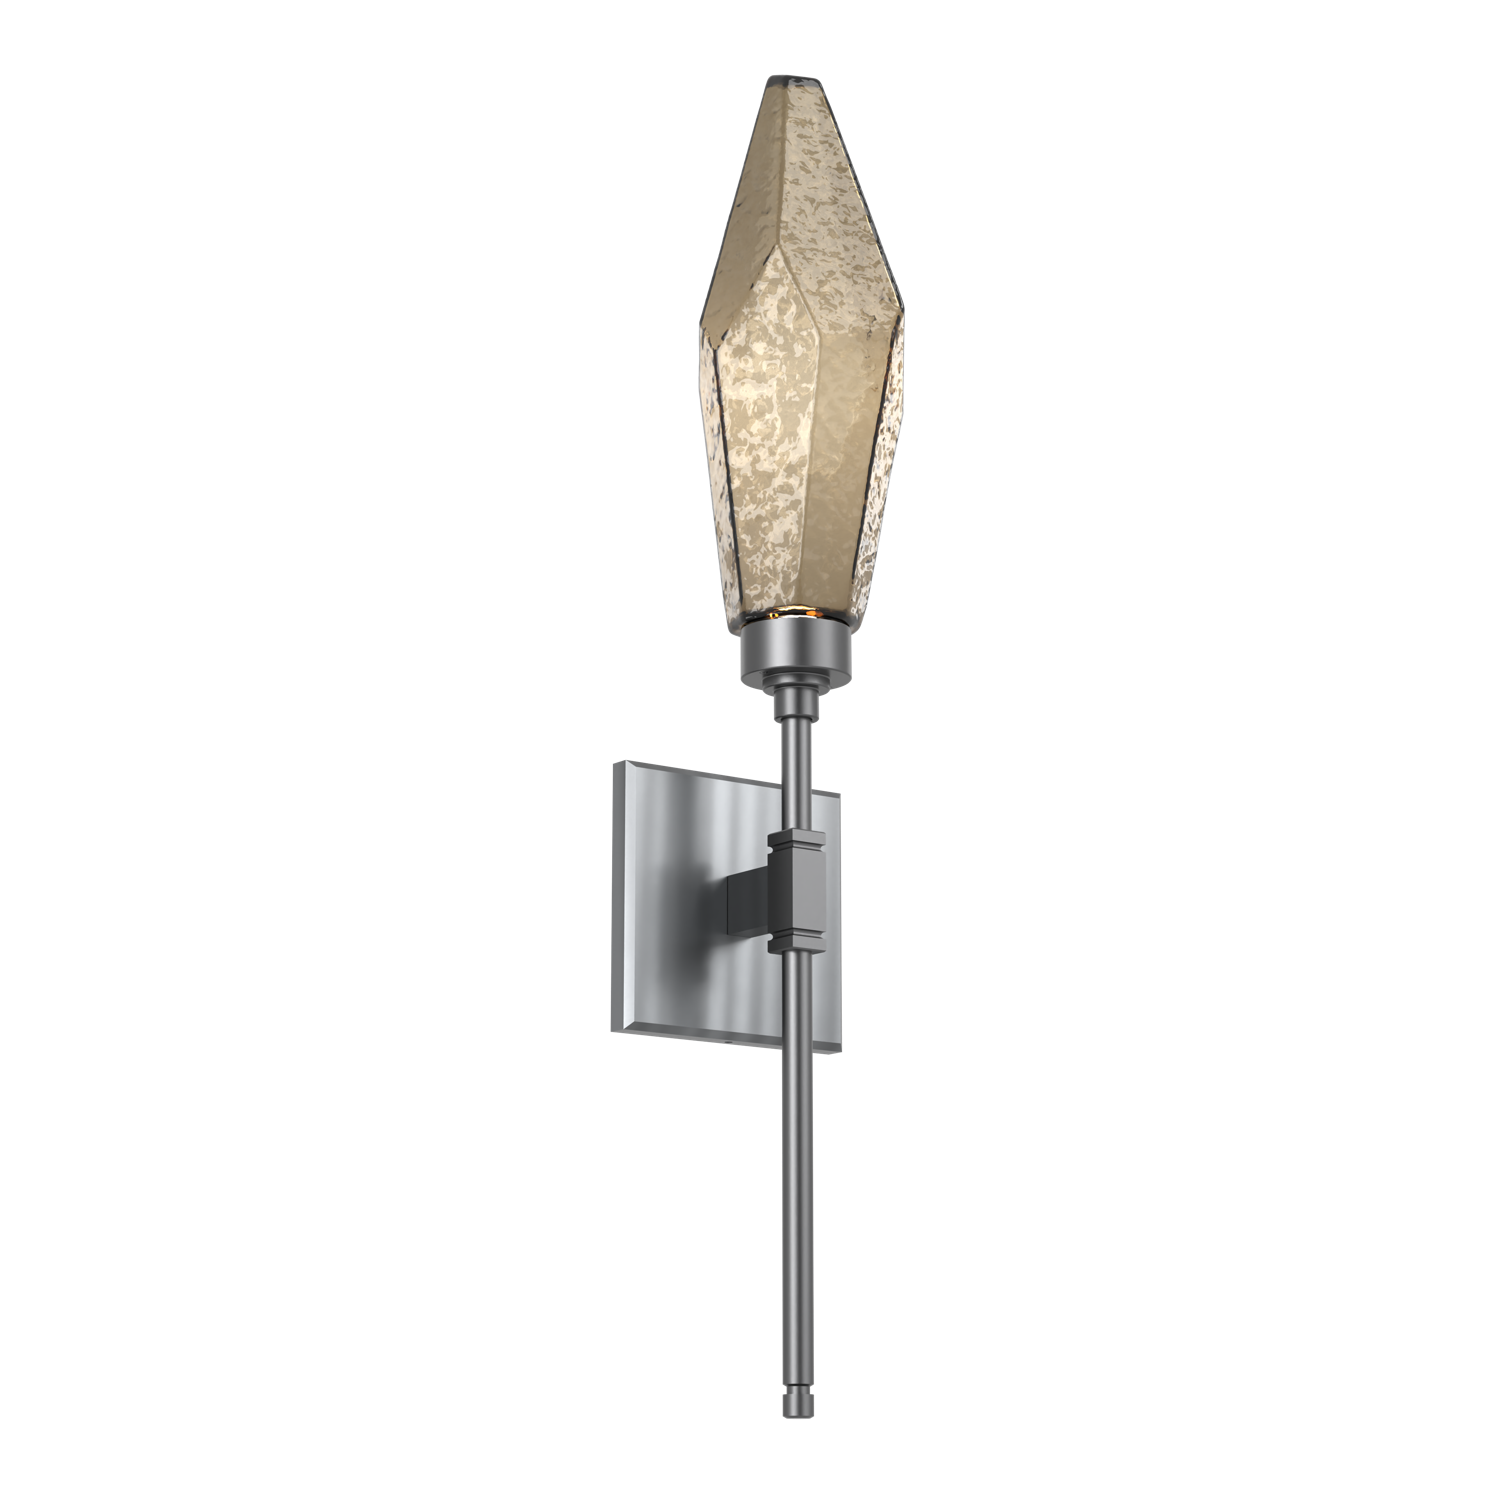 IDB0050-04-GM-CB-Hammerton-Studio-Rock-Crystal-ada-certified-belvedere-wall-sconce-with-gunmetal-finish-and-chilled-bronze-blown-glass-shades-and-LED-lamping